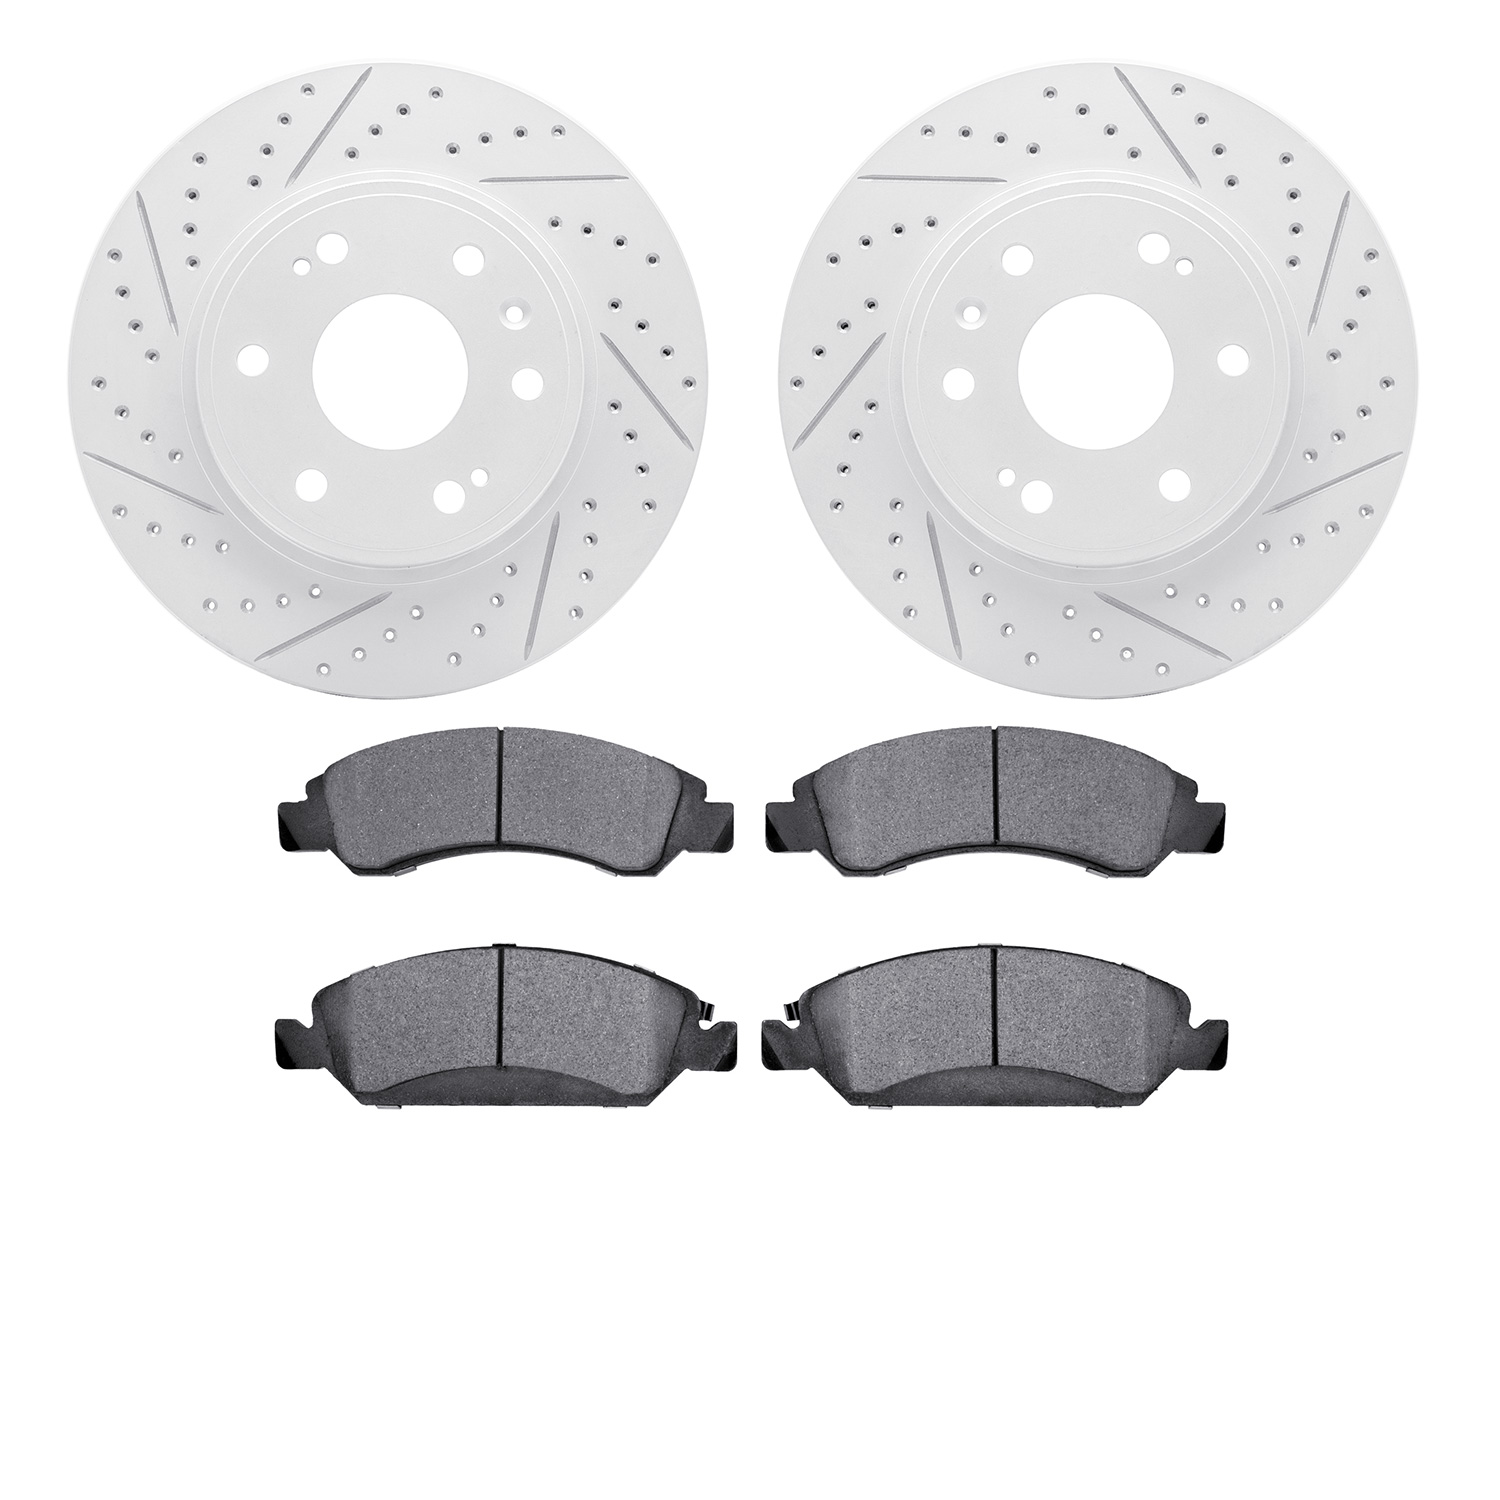 2402-48036 Geoperformance Drilled/Slotted Brake Rotors with Ultimate-Duty Brake Pads Kit, 2009-2020 GM, Position: Front